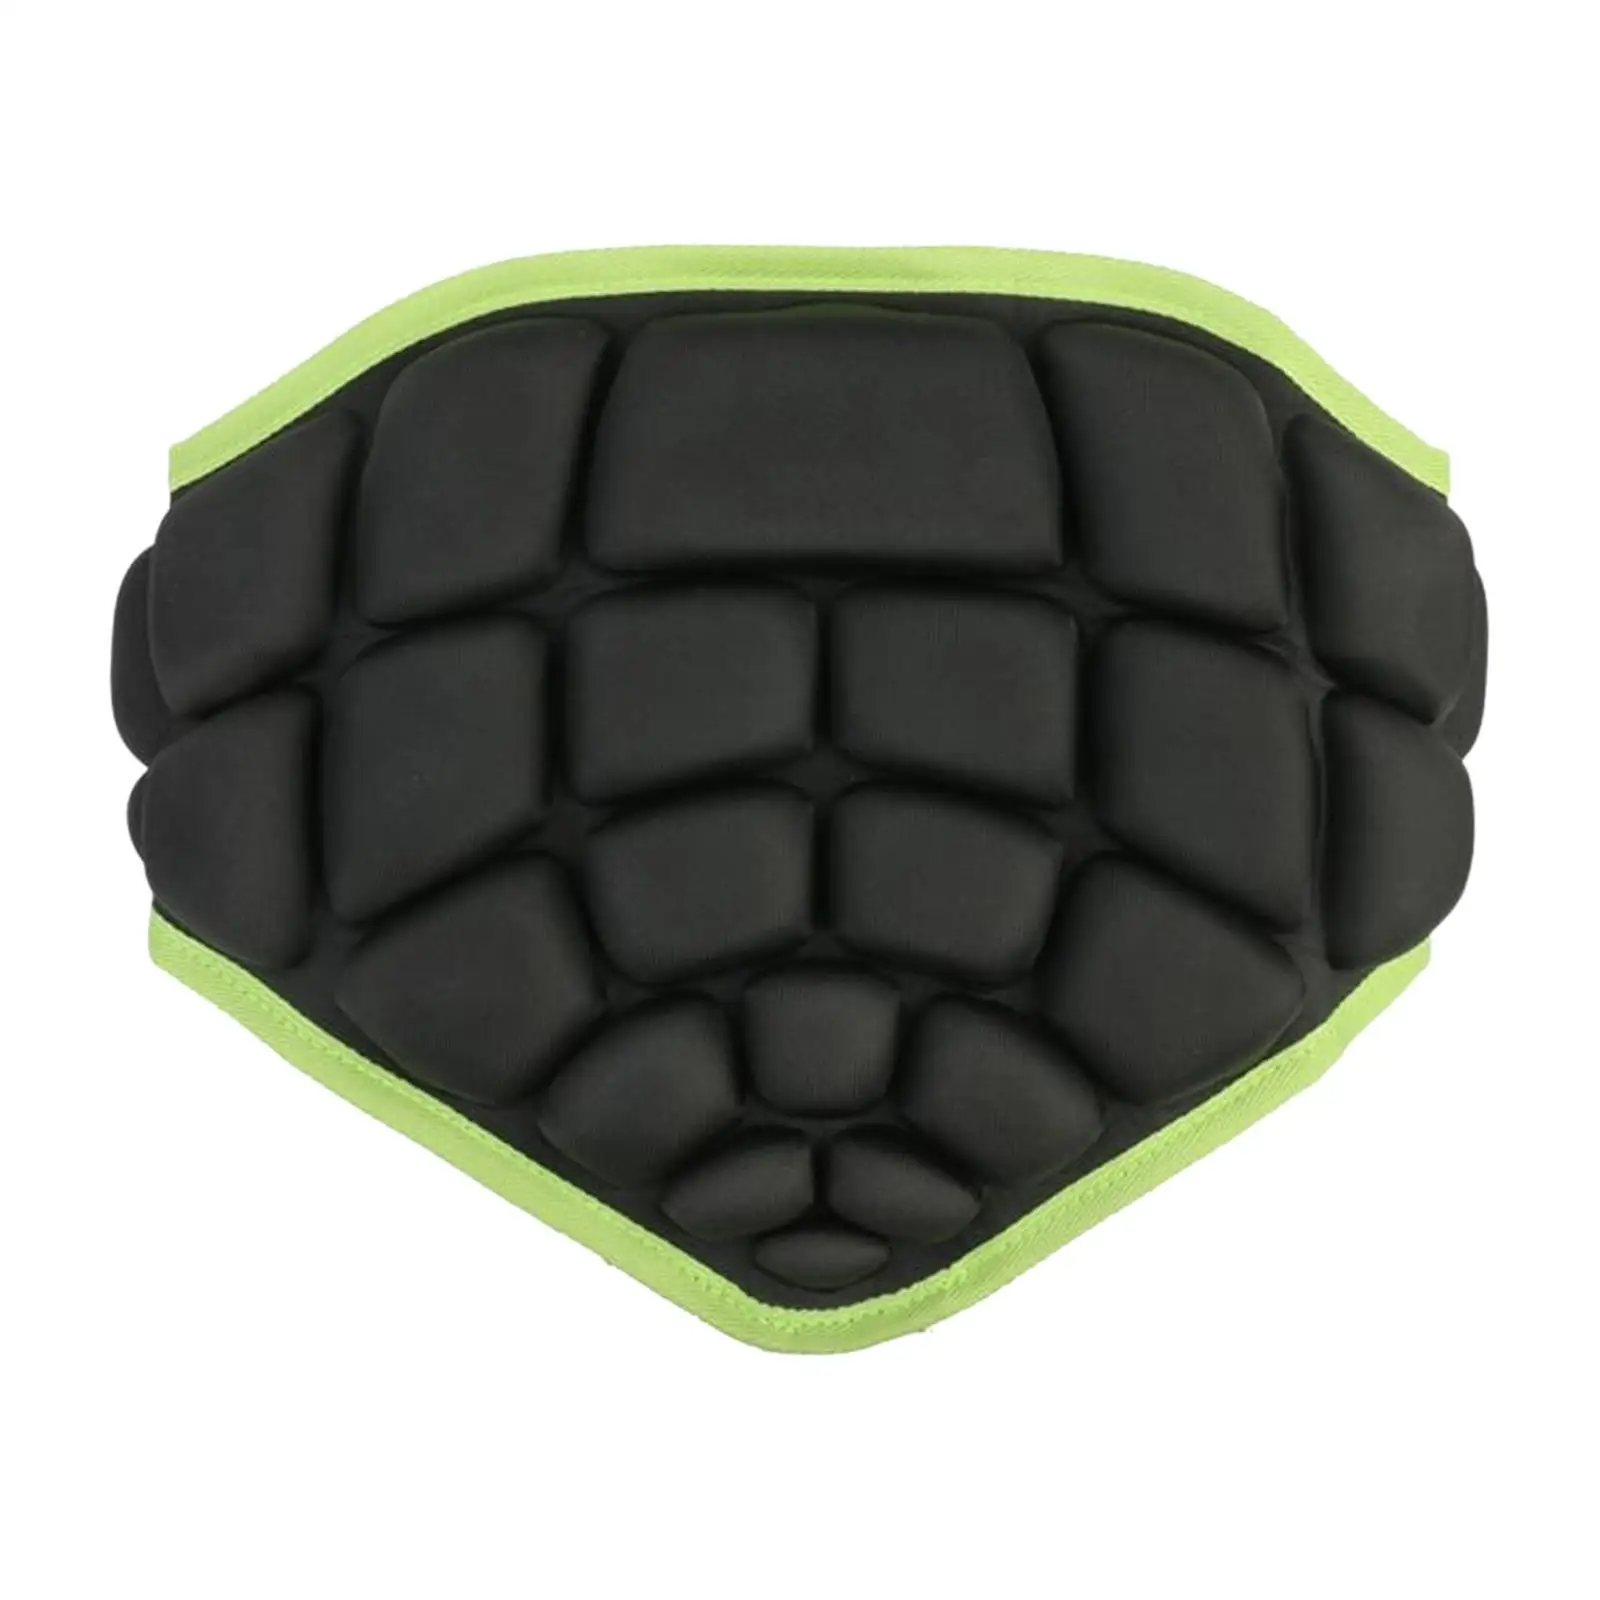 Hip Guard Pad Impact Protection Compression Lightweight Adjustable for Youth, Skiing